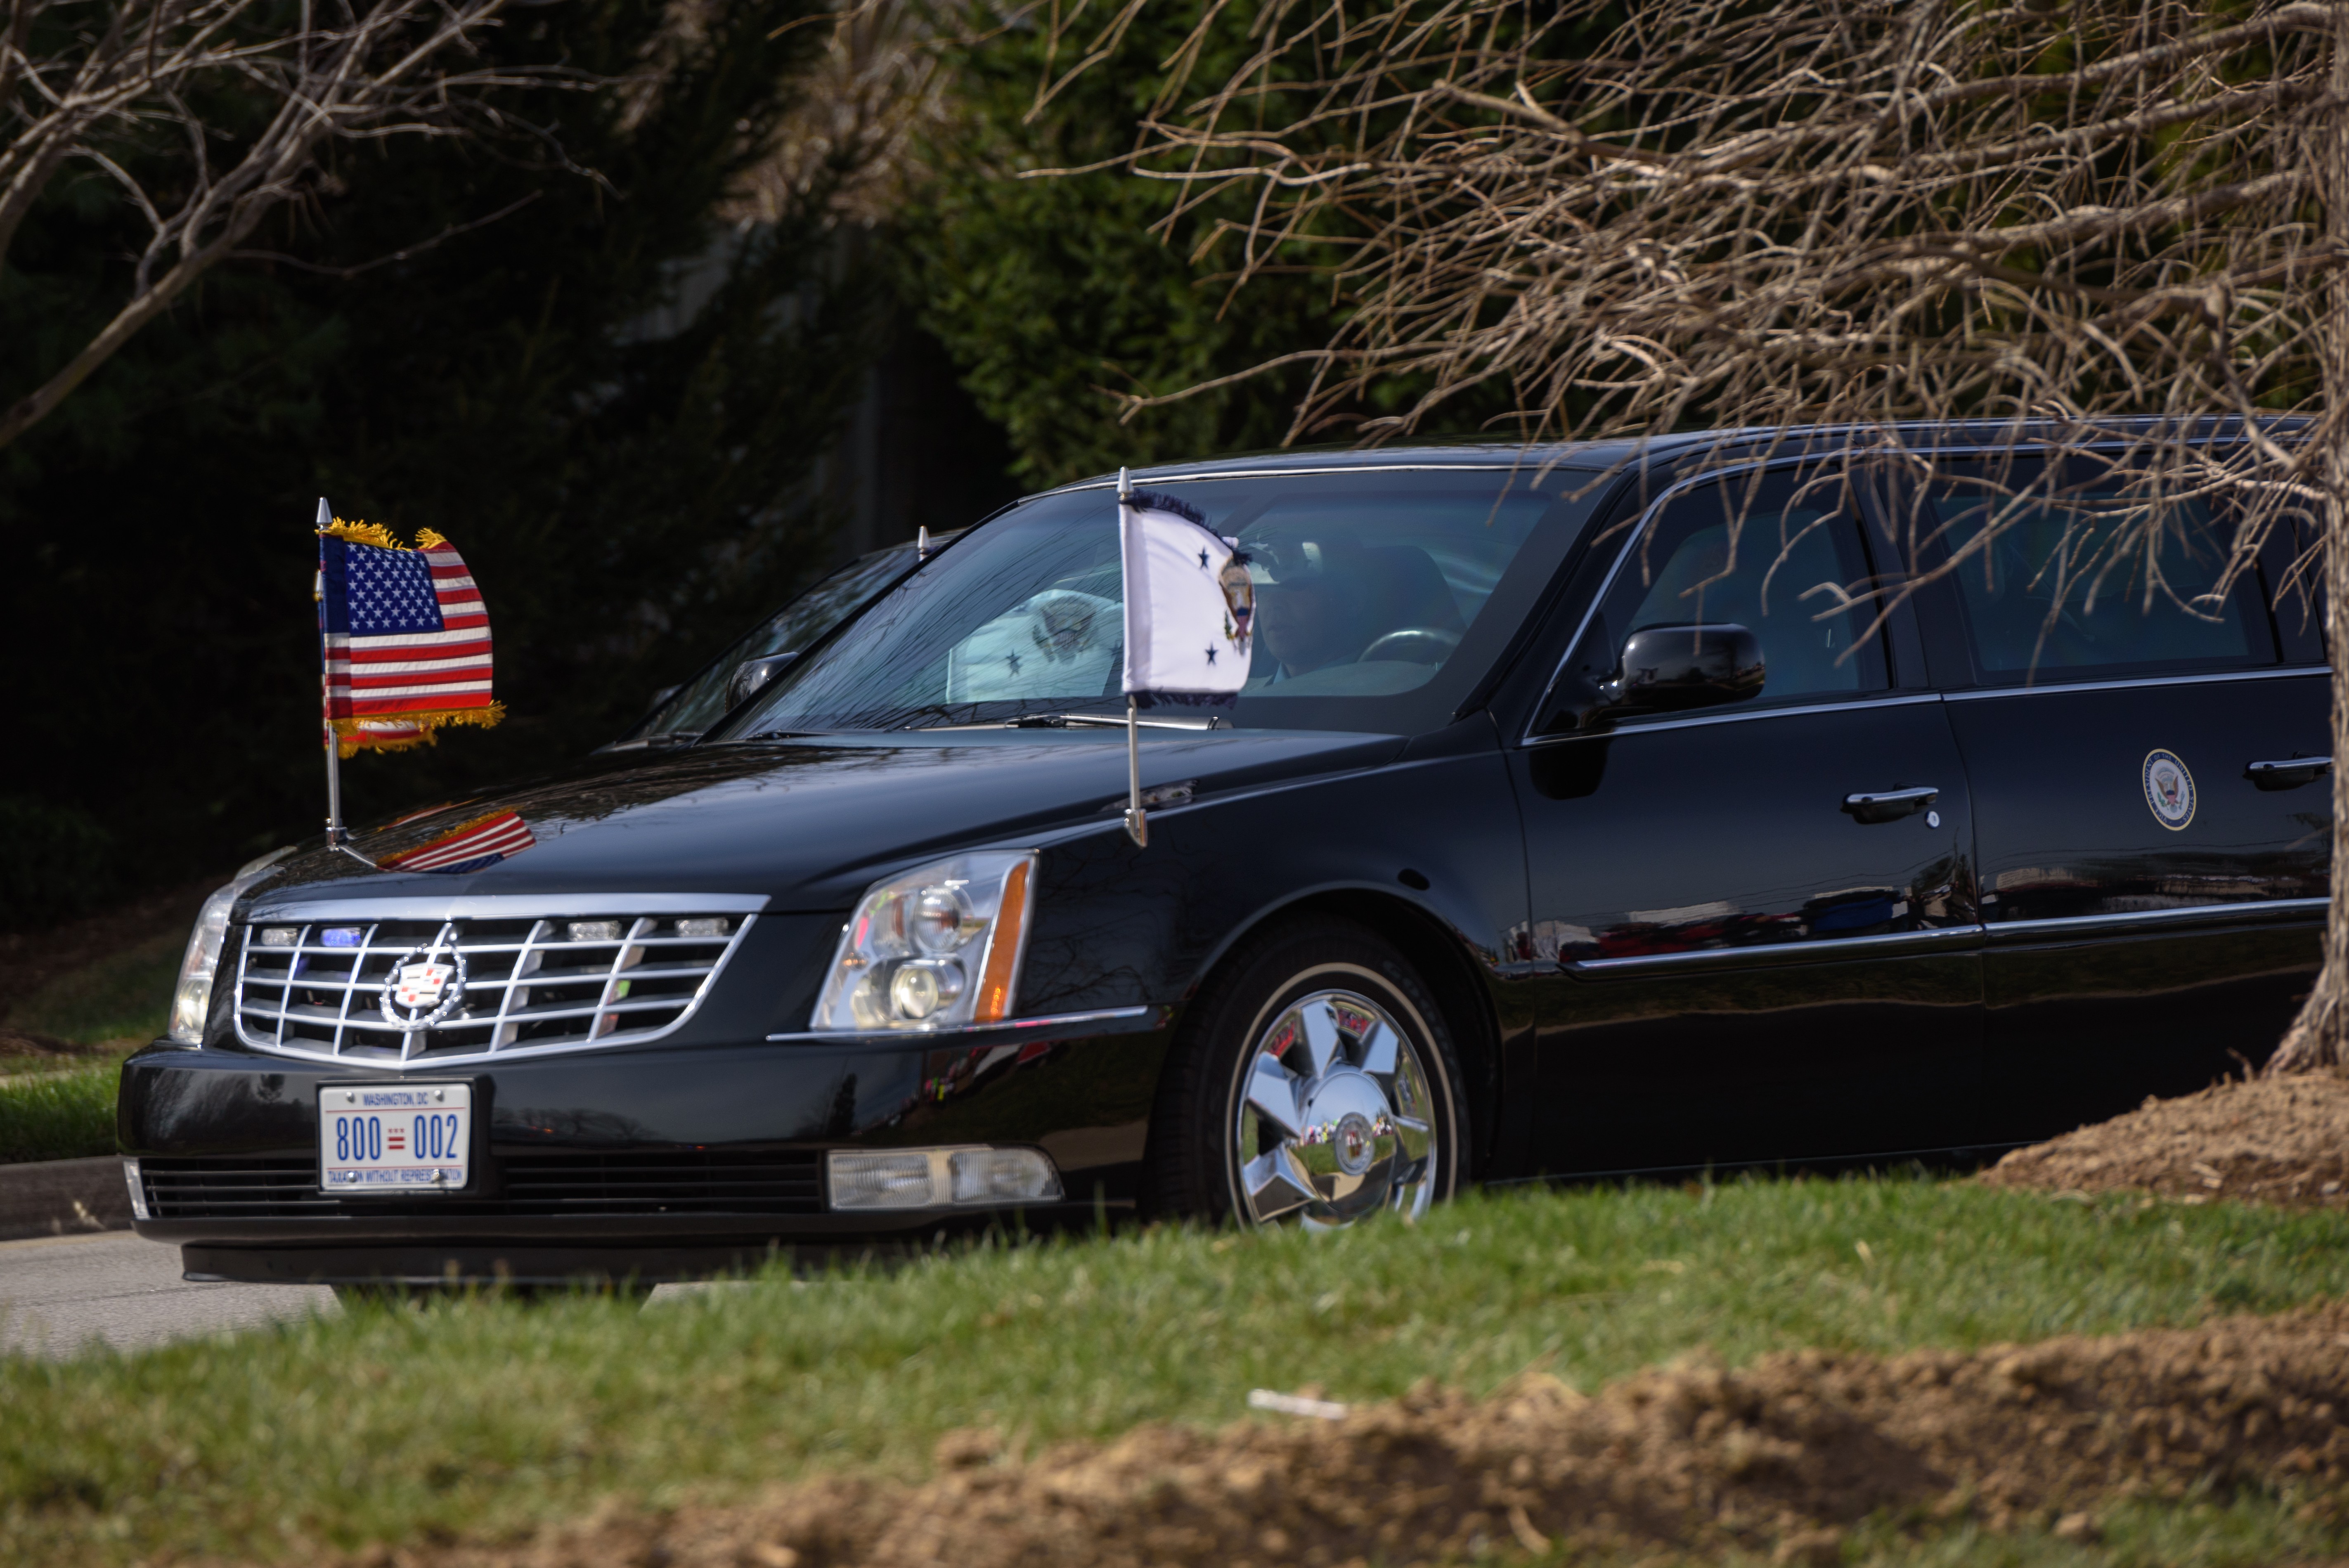 The arrival of the Vice Presidential limousine. - BRIAN BOHANNON